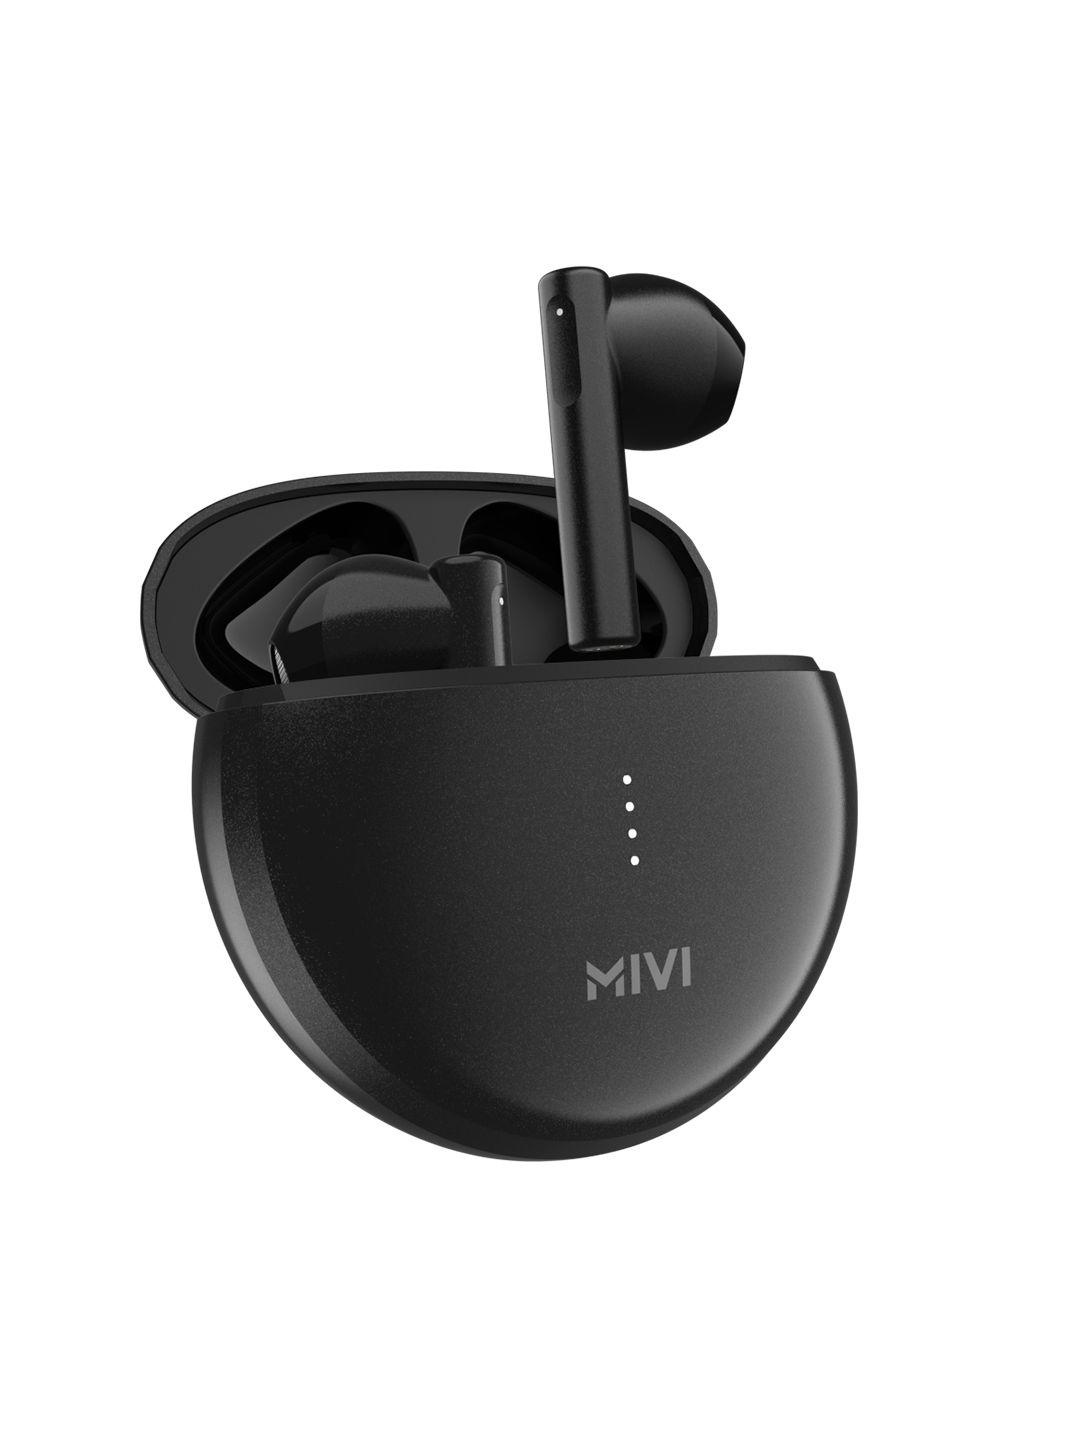 mivi duopods p70 earbuds with 50hrs playtime & rich bass